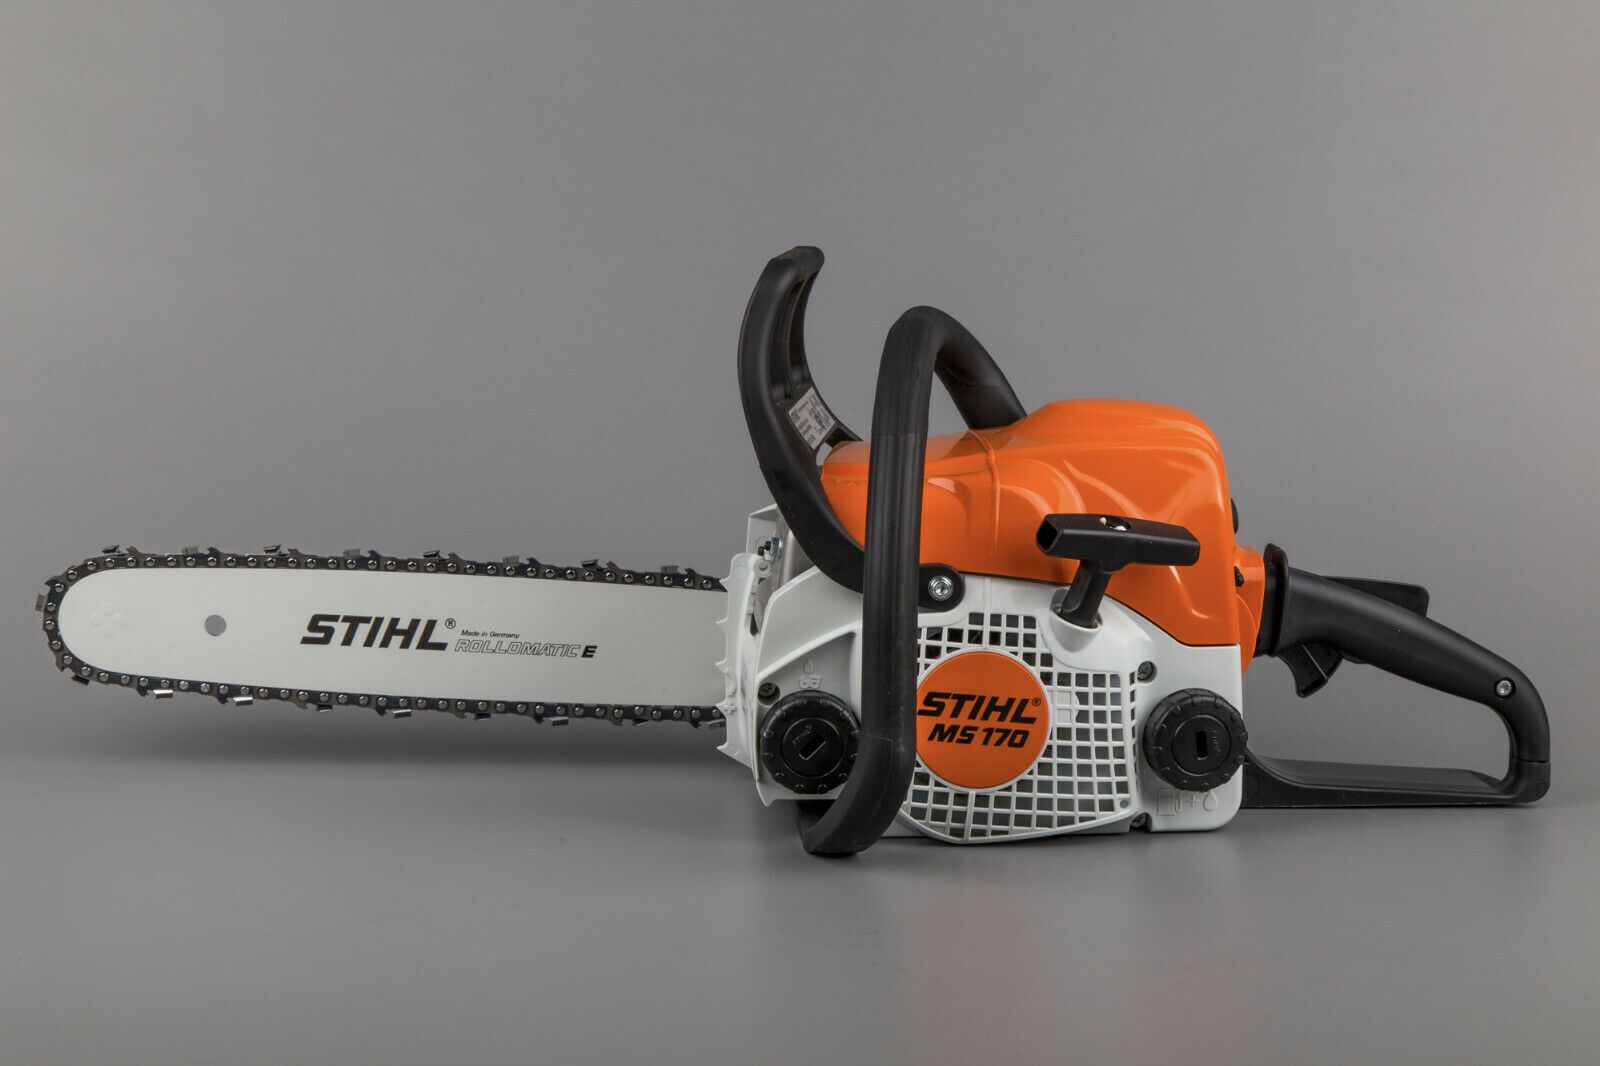 2021 NEW ORIGINAL STIHL MS170 CHAINSAW With 14 BAR, TOOLS, COVER AND